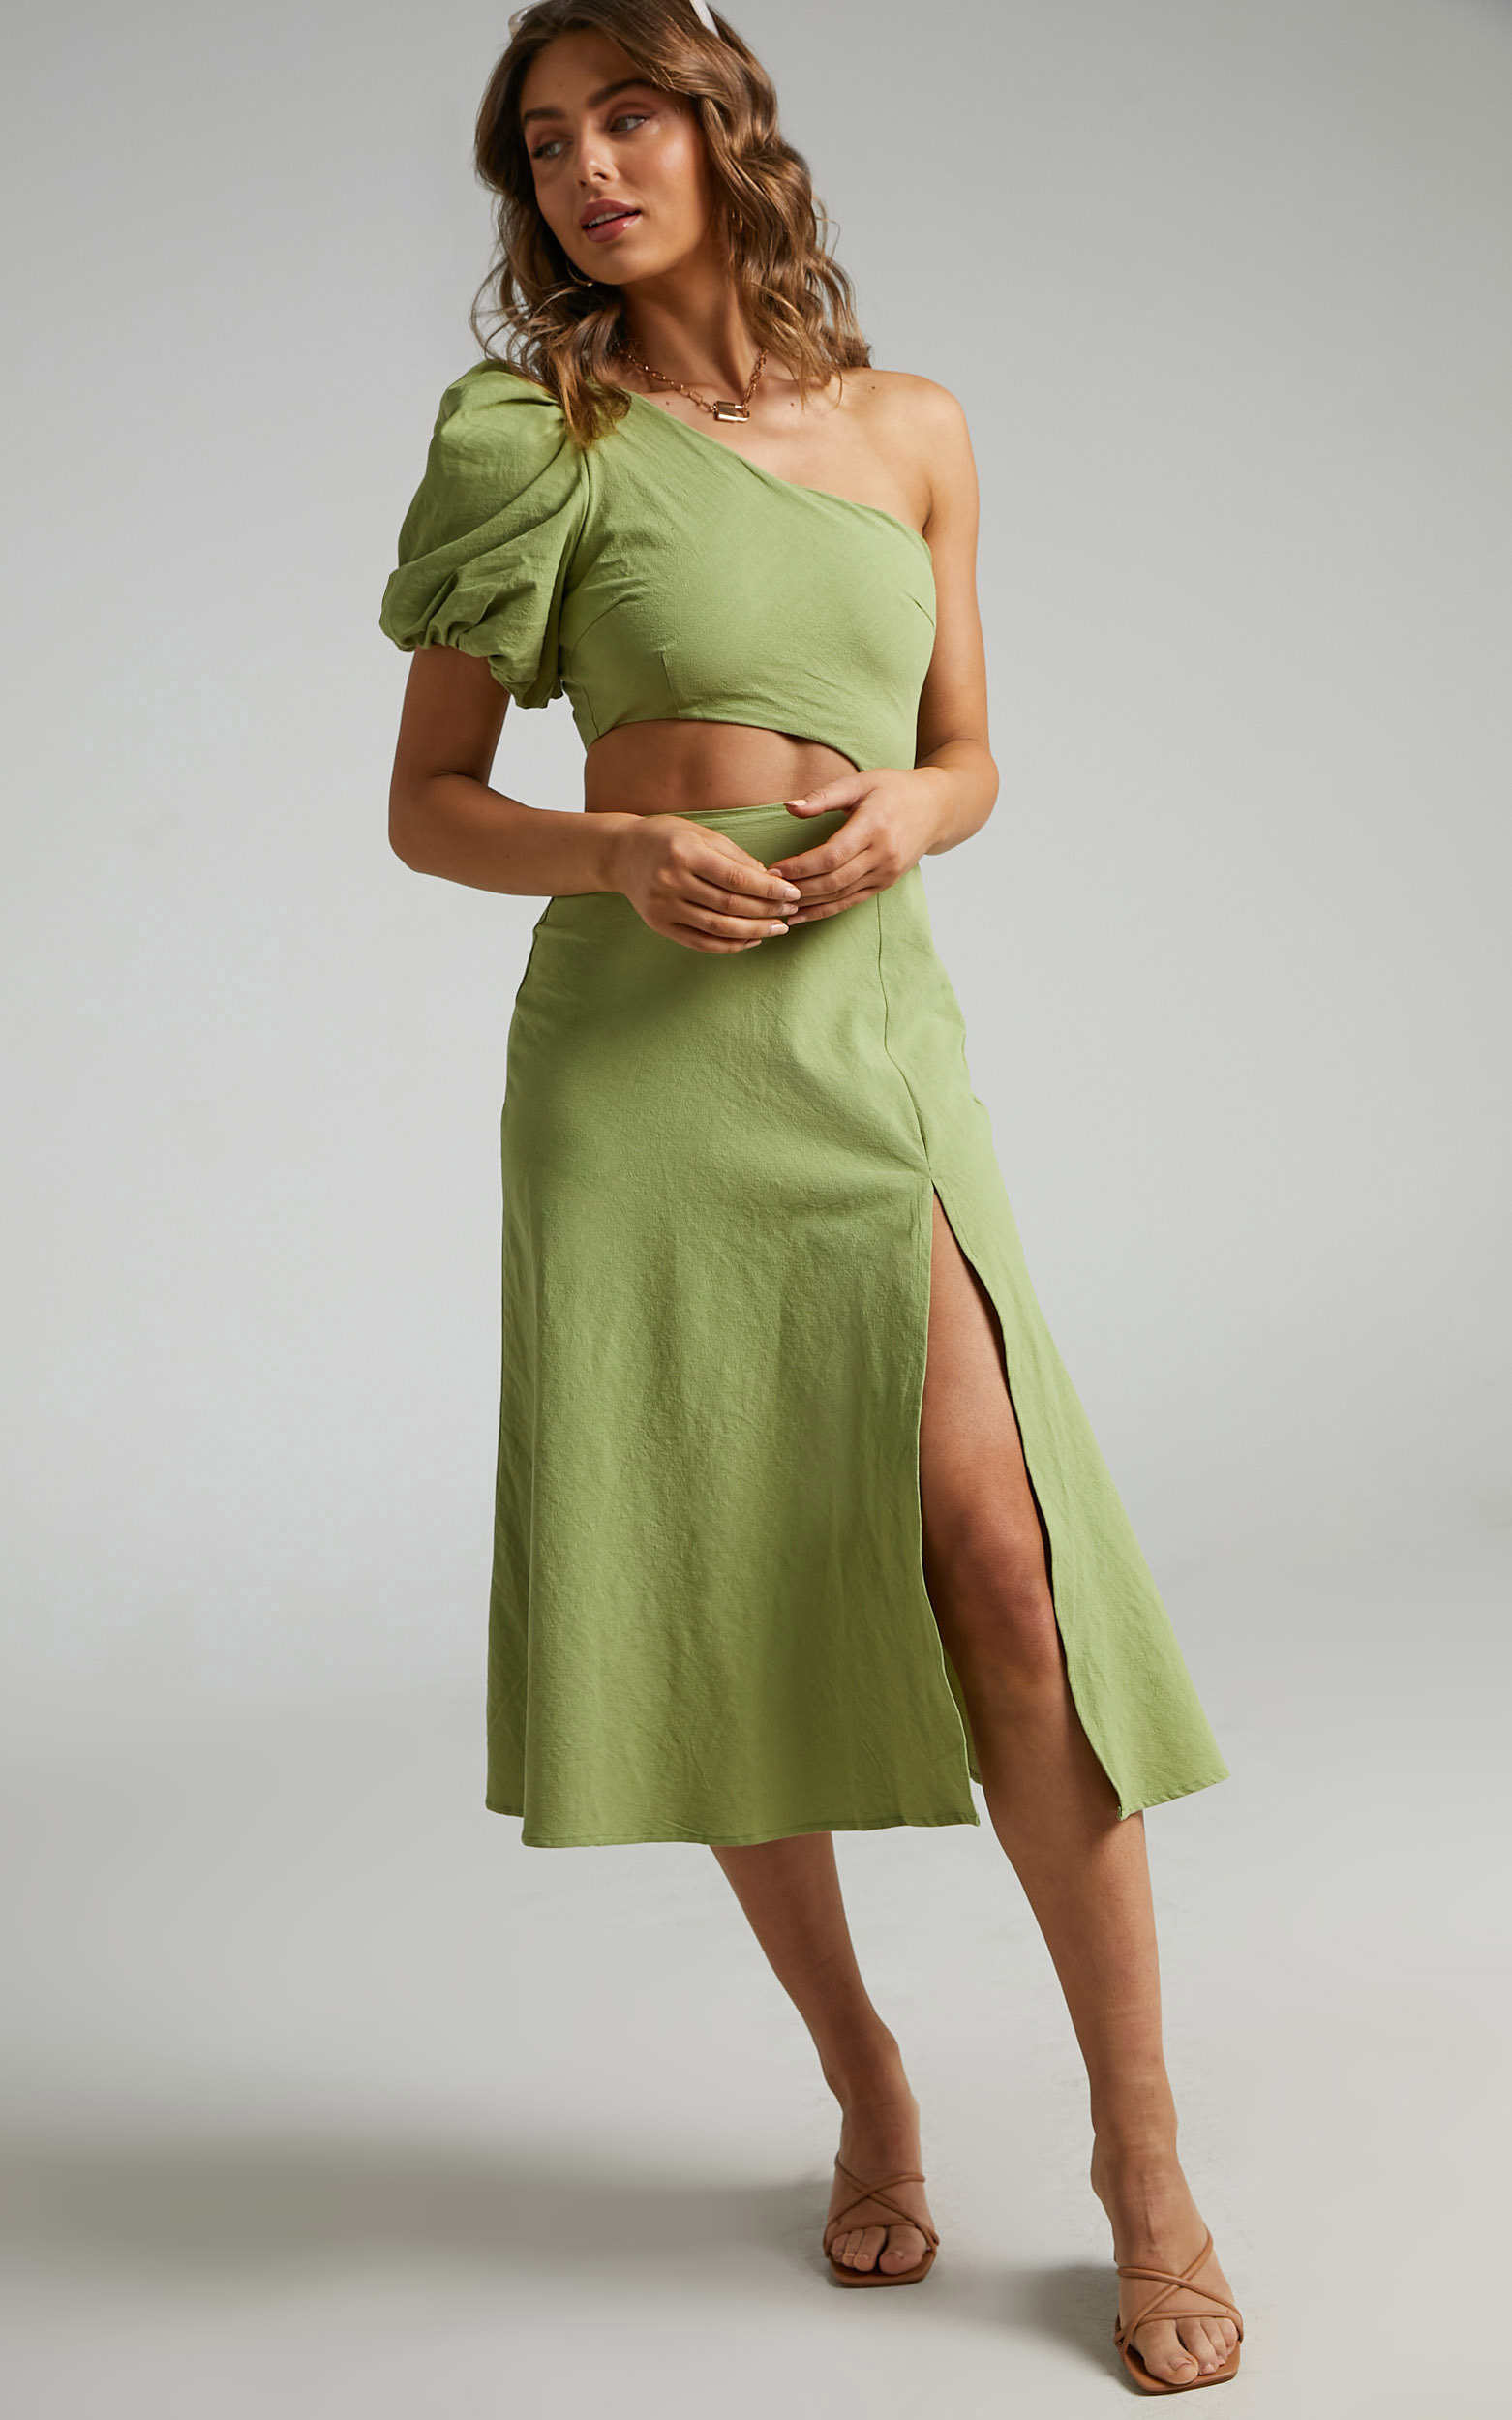 Marcia One Shoulder Midi Dress with Side Cut Out in Green Linen Look - 04, GRN3, hi-res image number null